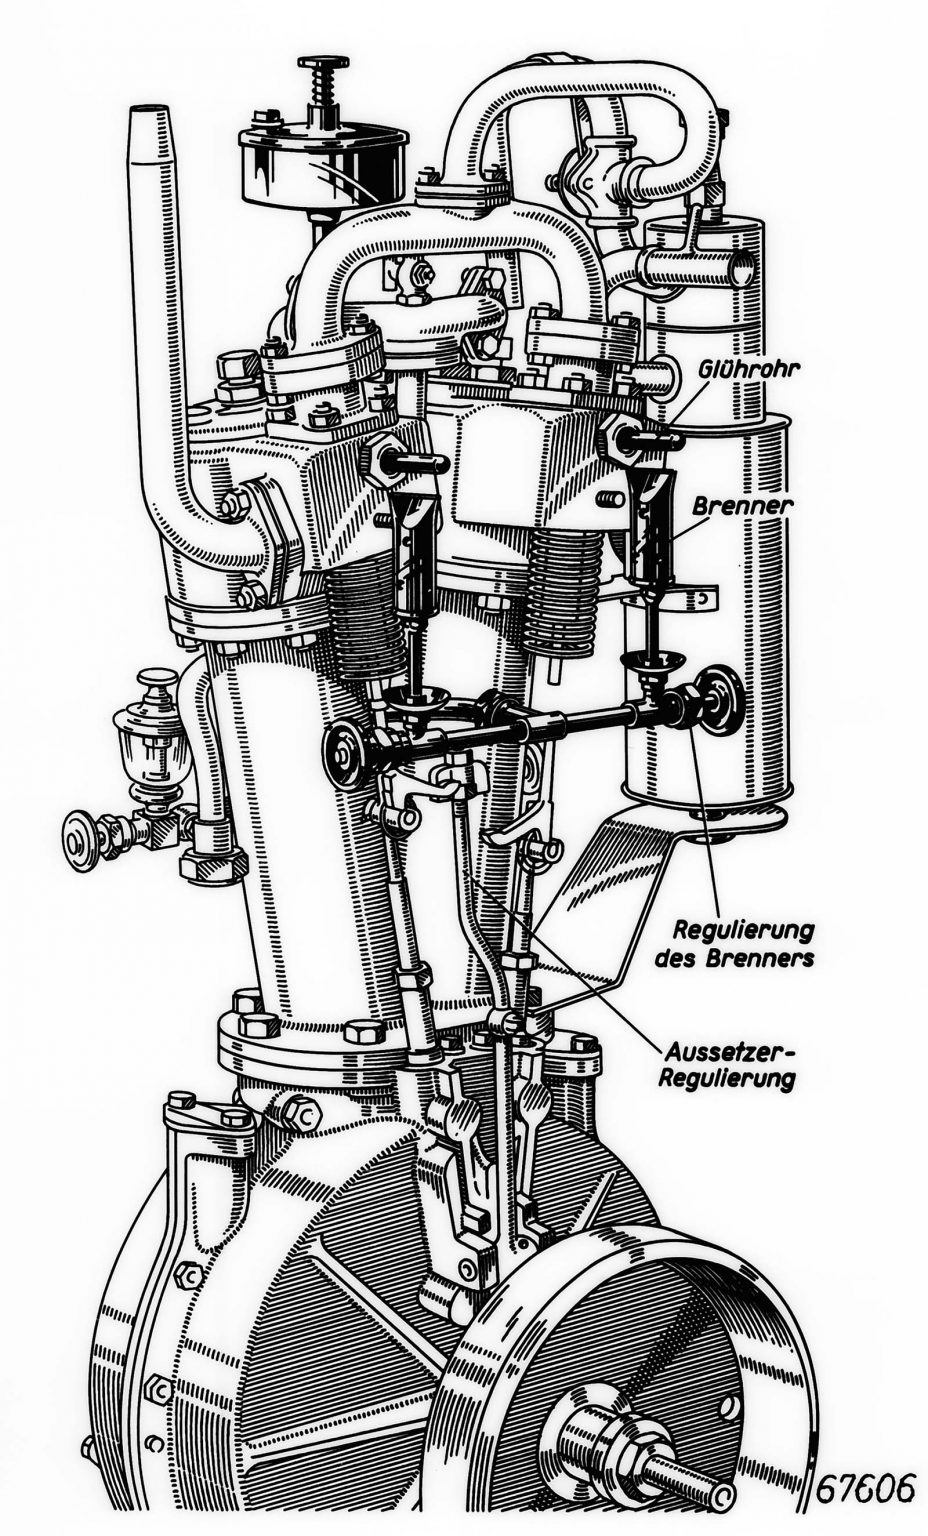 Drawing of the two-cylinder V-engine developed by Wilhelm Maybach